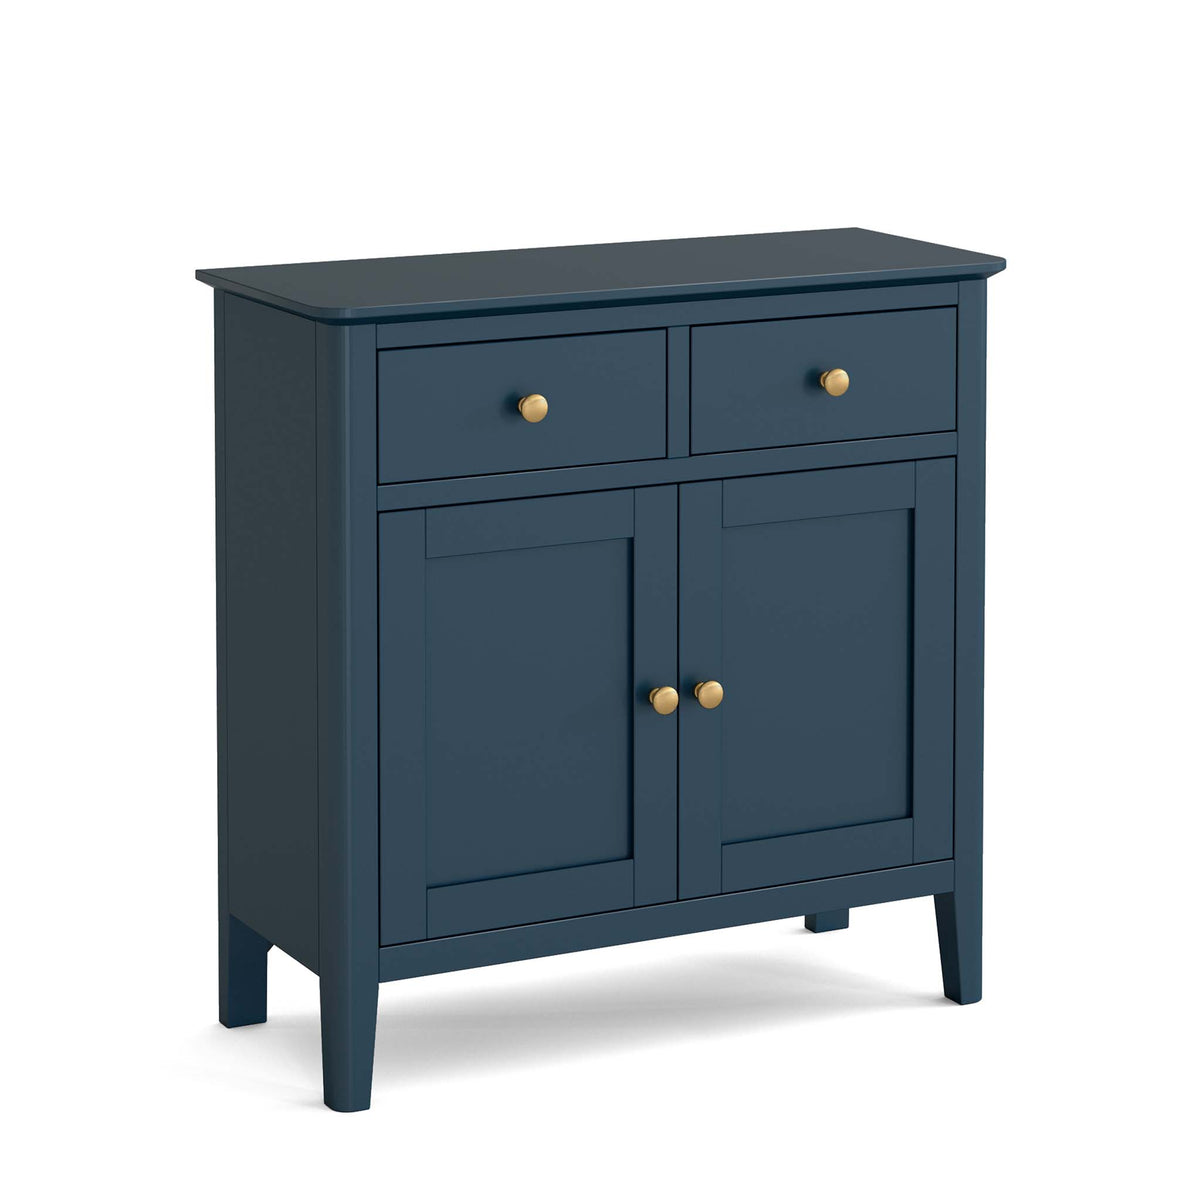 Oak, Painted & Hardwood Sideboards | Quality Furniture, Fast Delivery ...